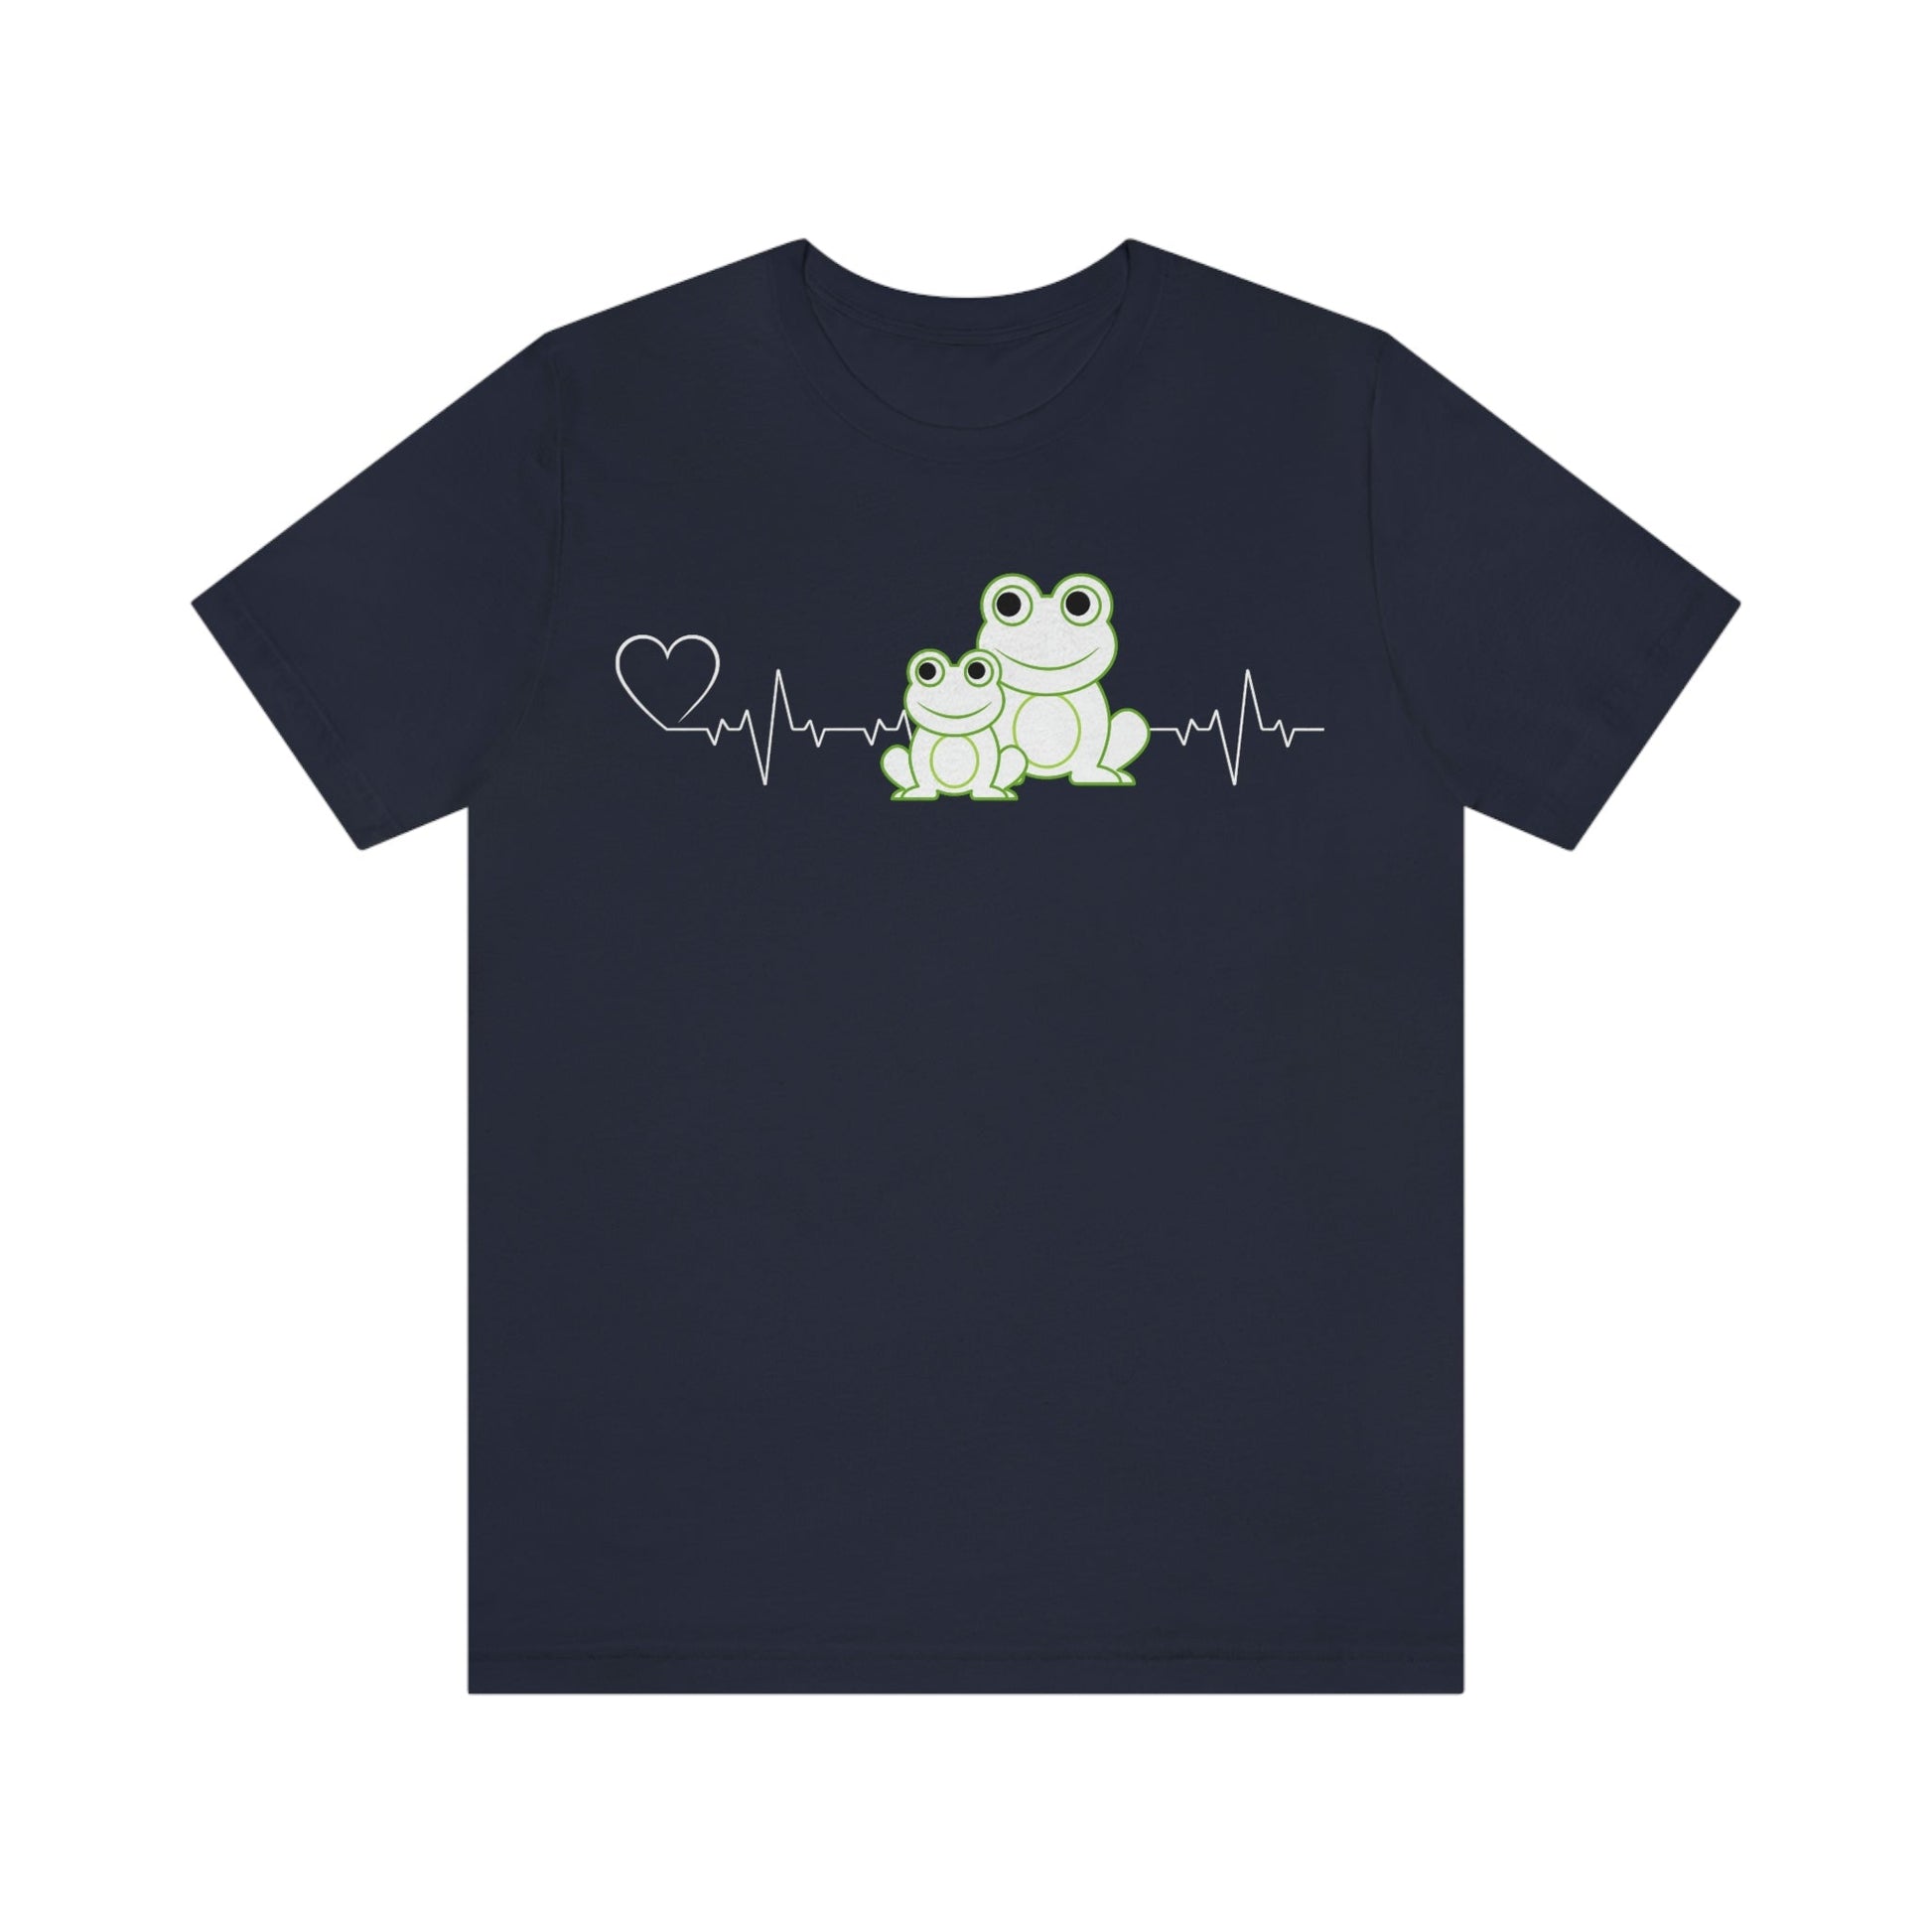 Heartbeat Mom & Baby Frogs Graphic T-Shirt-T-Shirt-Navy-S-mysticalcherry